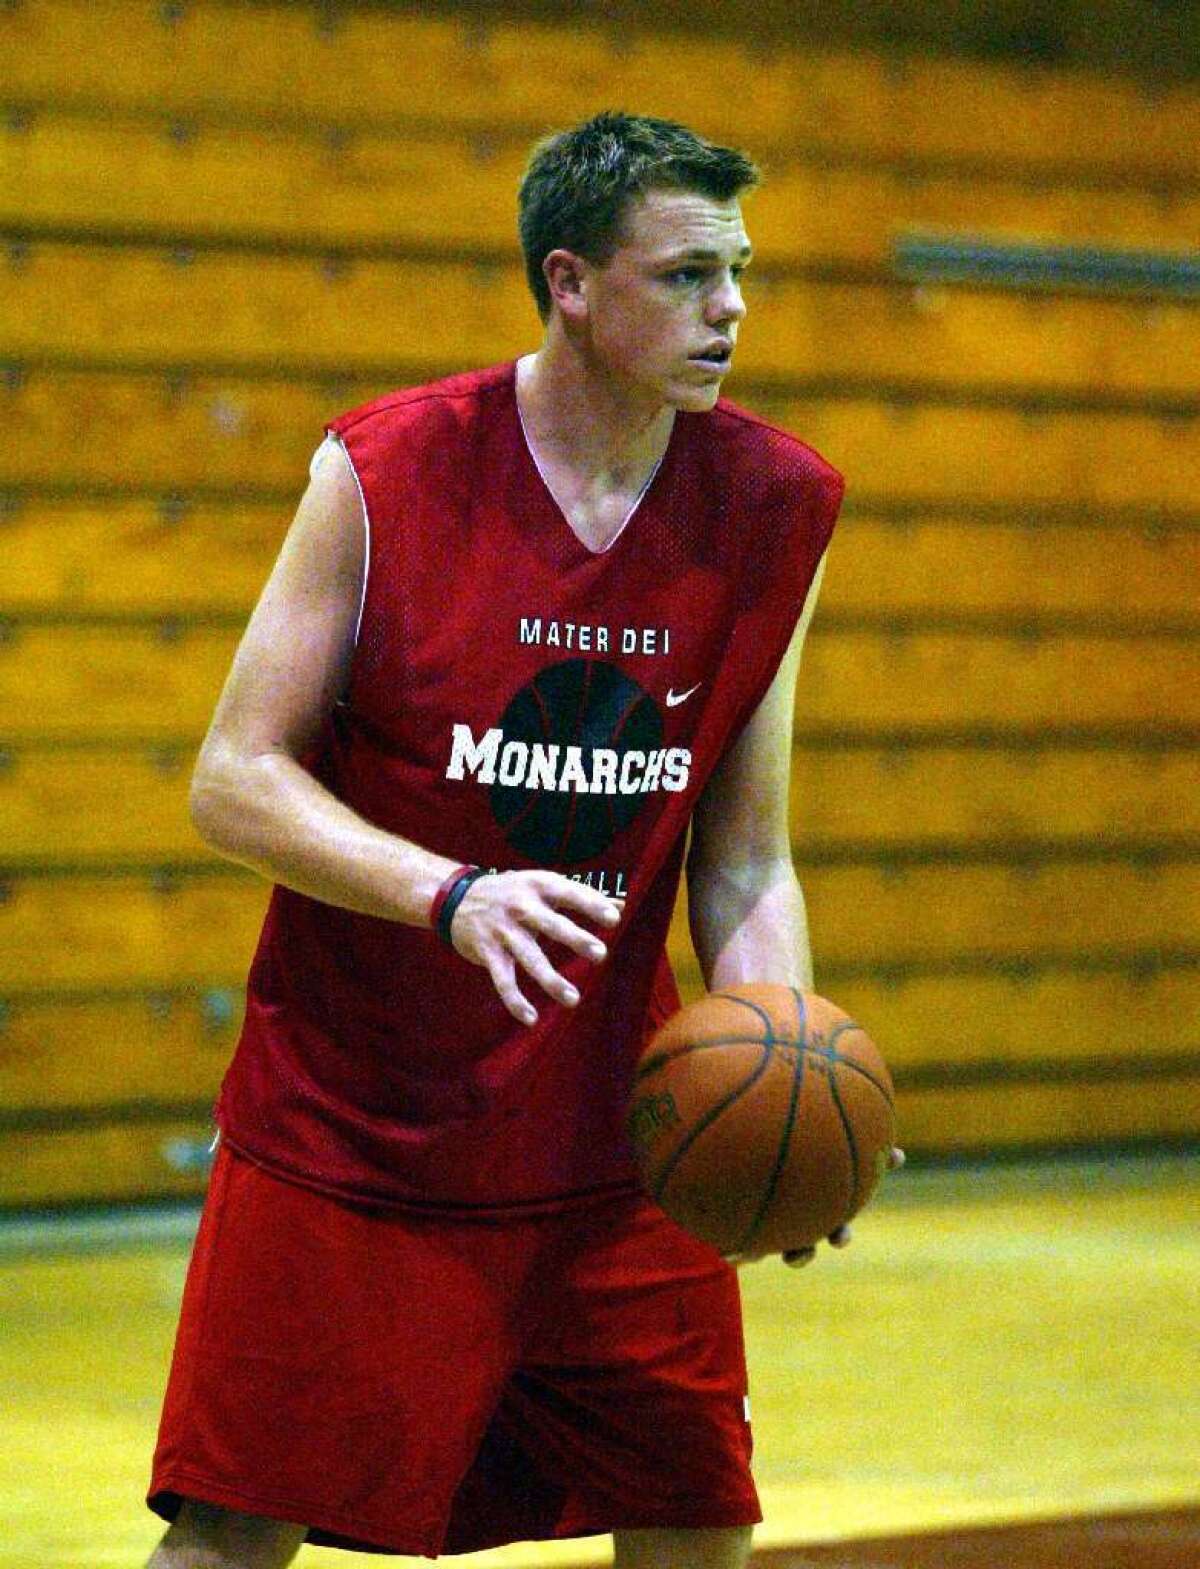 Taylor King, in 2003 when he played for Mater Dei, is back playing basketball again.